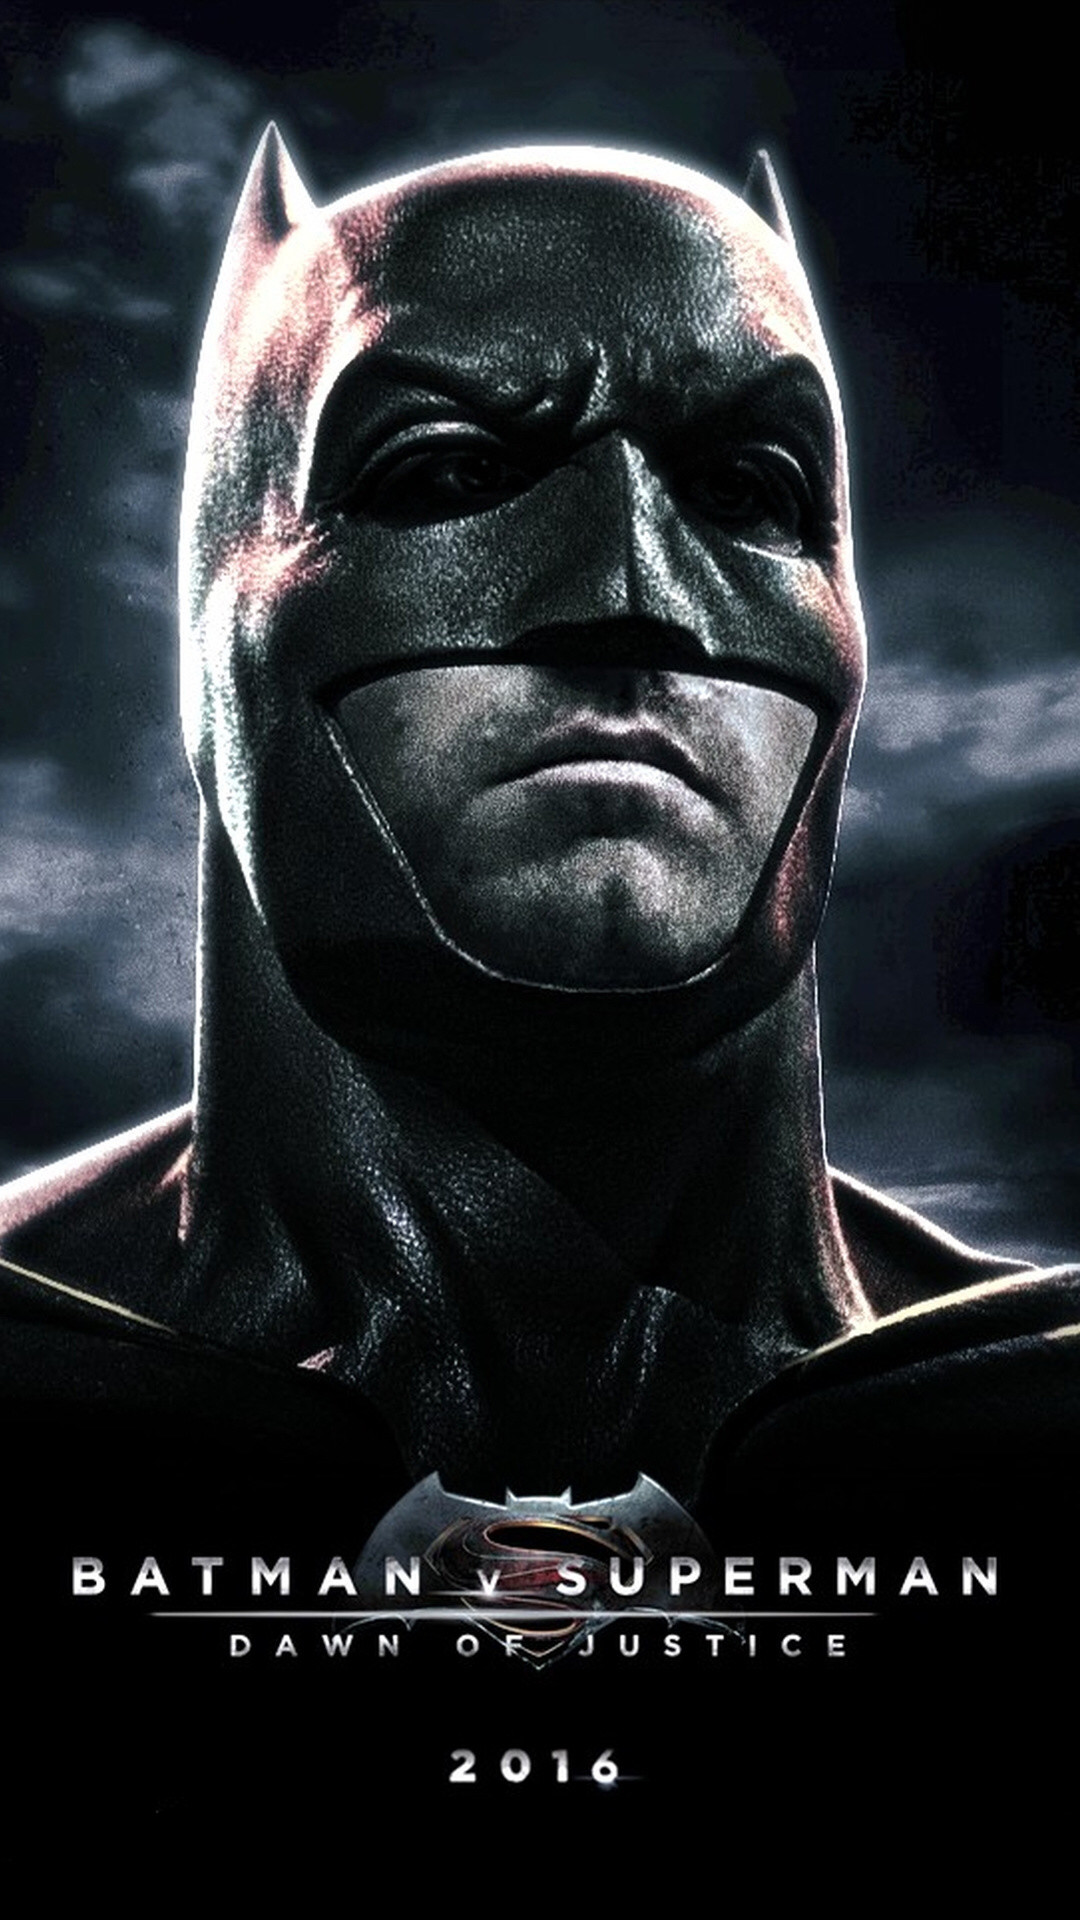 Check out this wallpaper for your iPhone Batman V Superman